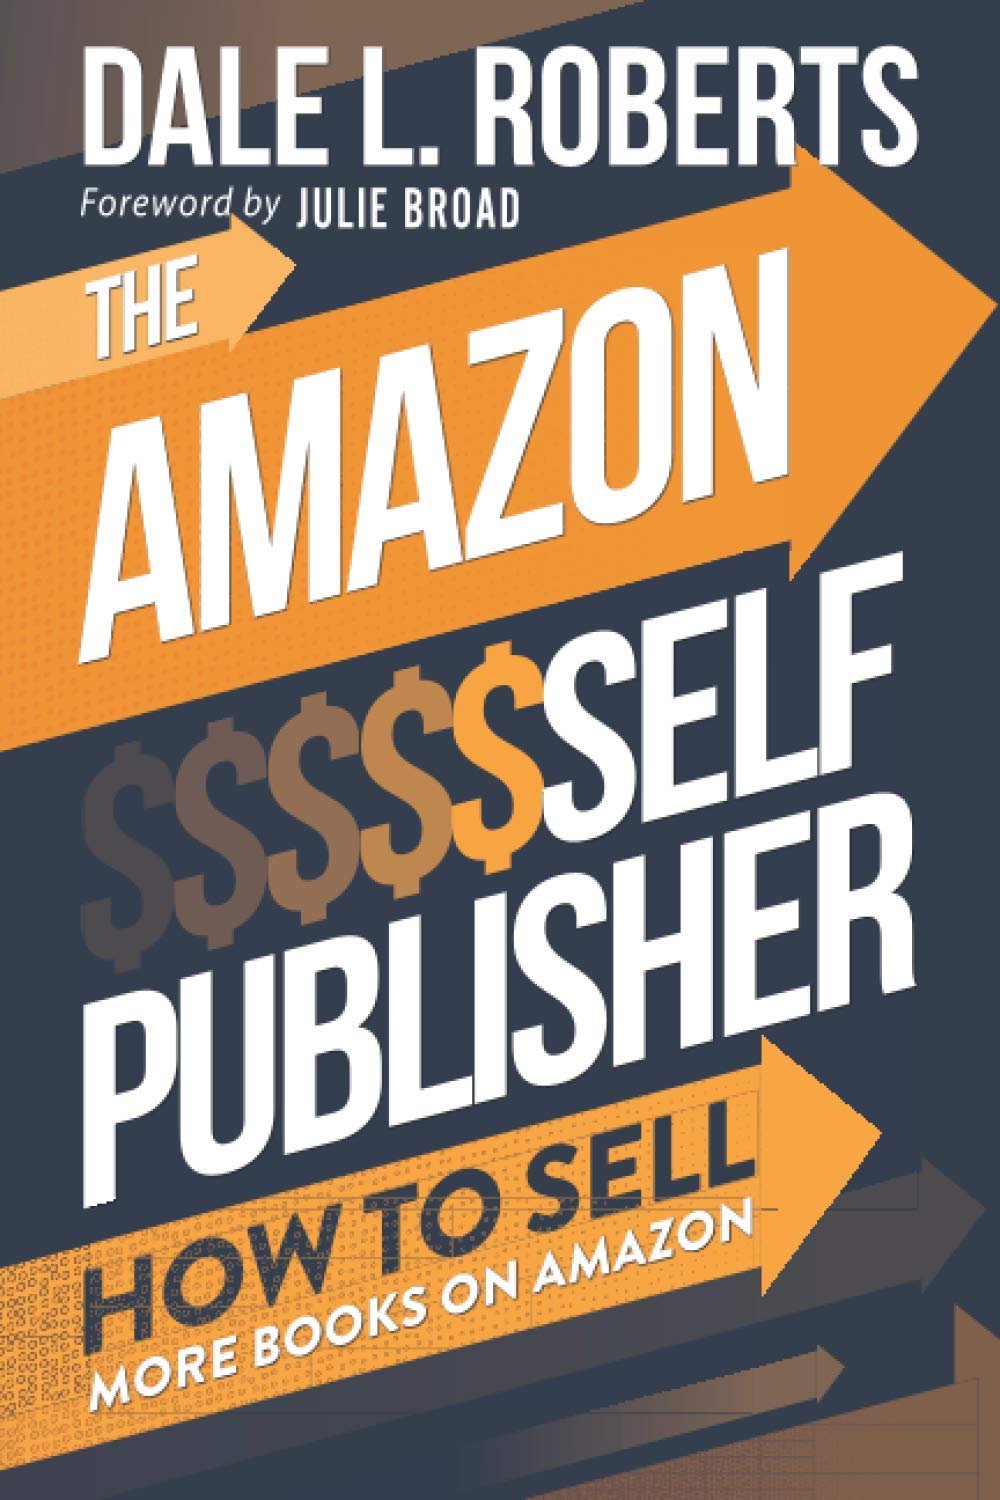 The Amazon Self Publisher: How to Sell More Books on Amazon by Dale L. Roberts